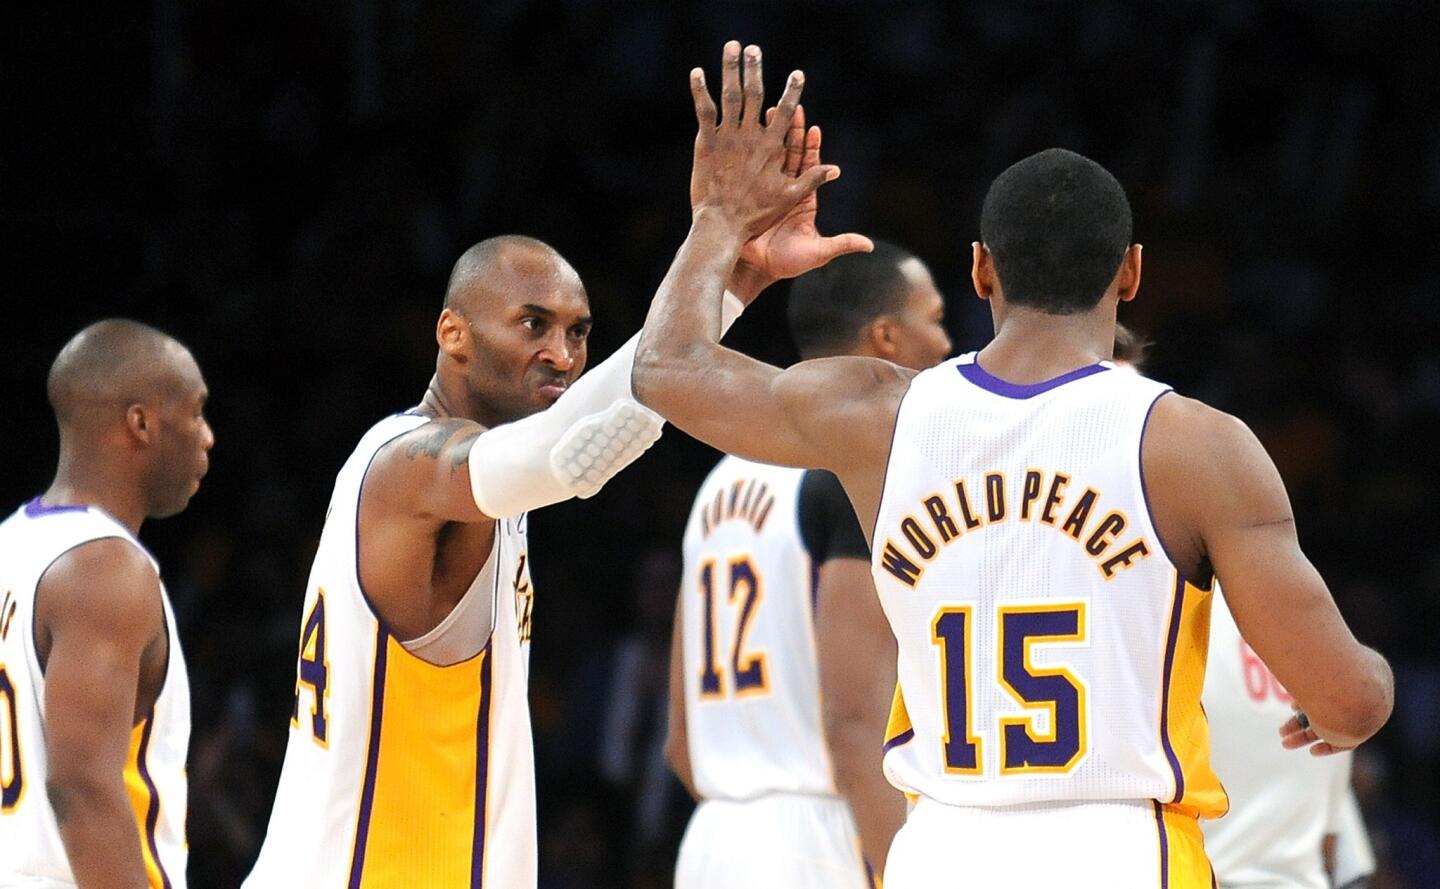 Lakers guard Kobe Bryant and forward Metta World Peace celebrate as they approach a victory over the Bulls on Sunday afternoon at Staples Center.